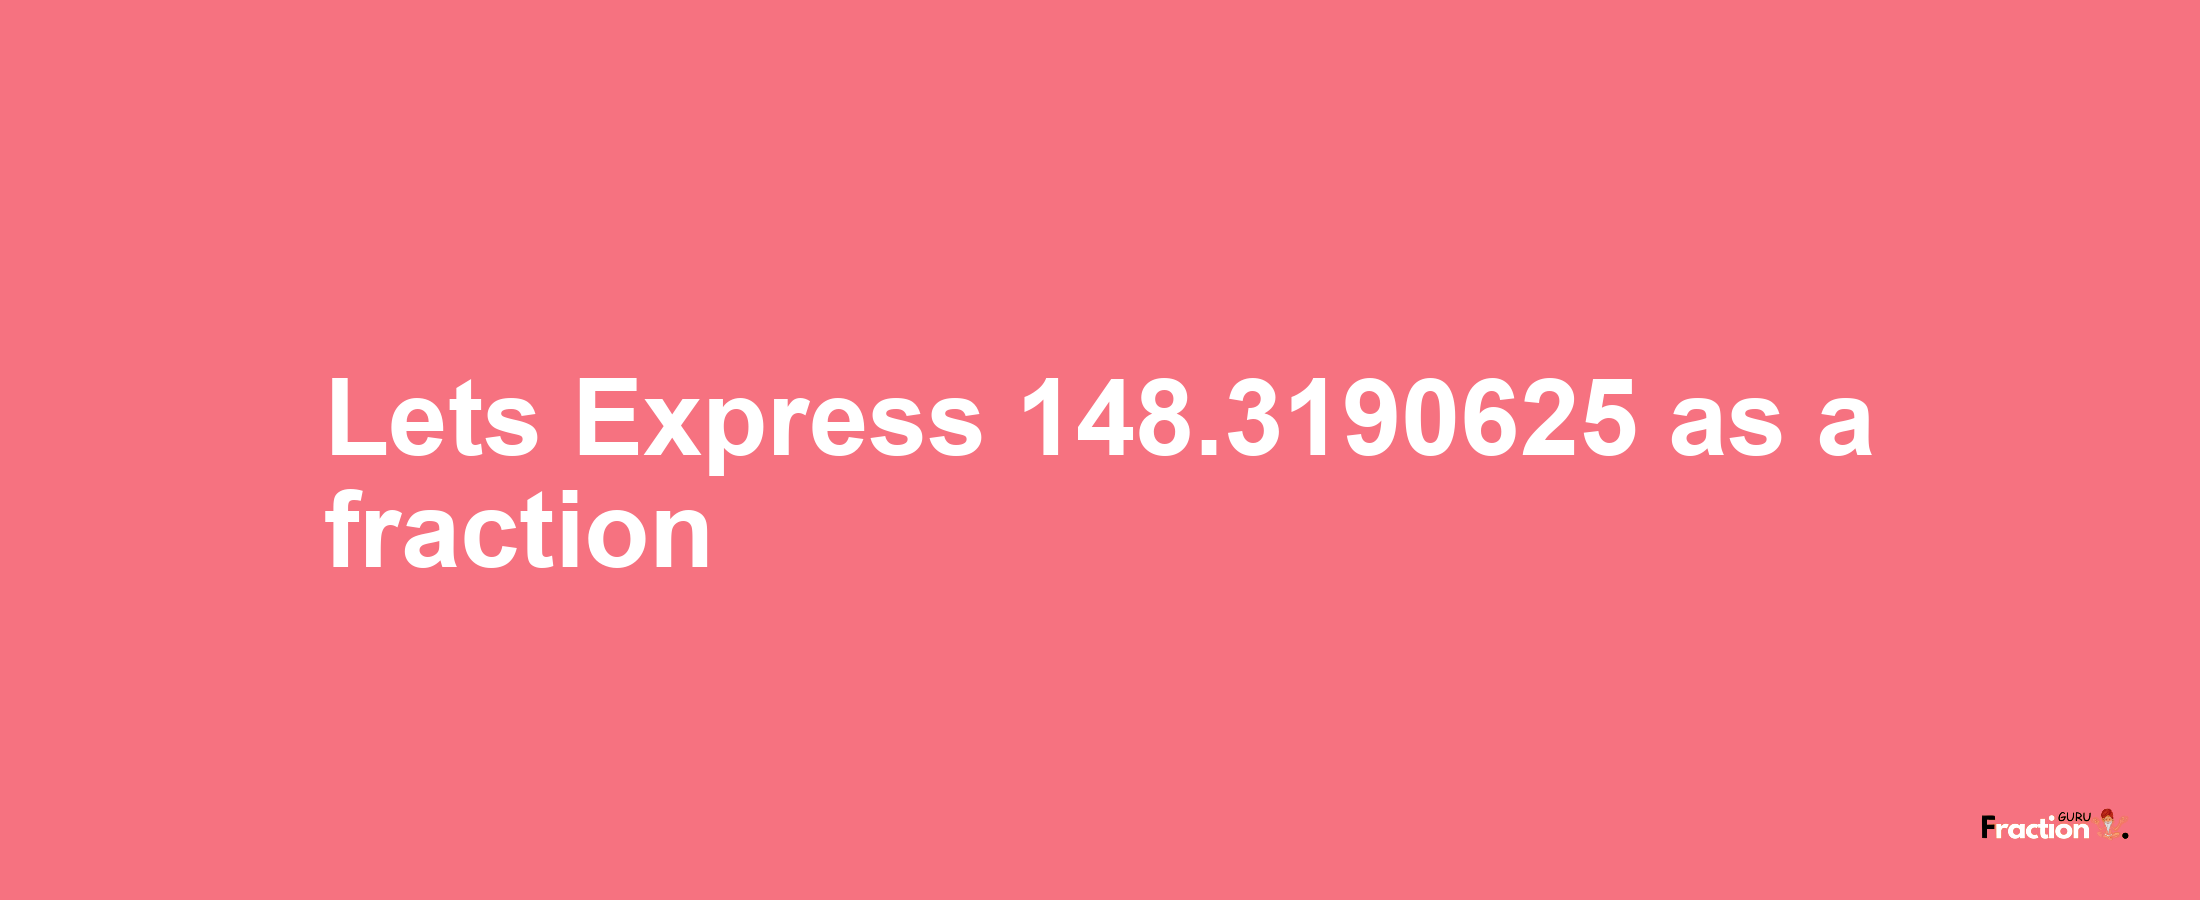 Lets Express 148.3190625 as afraction